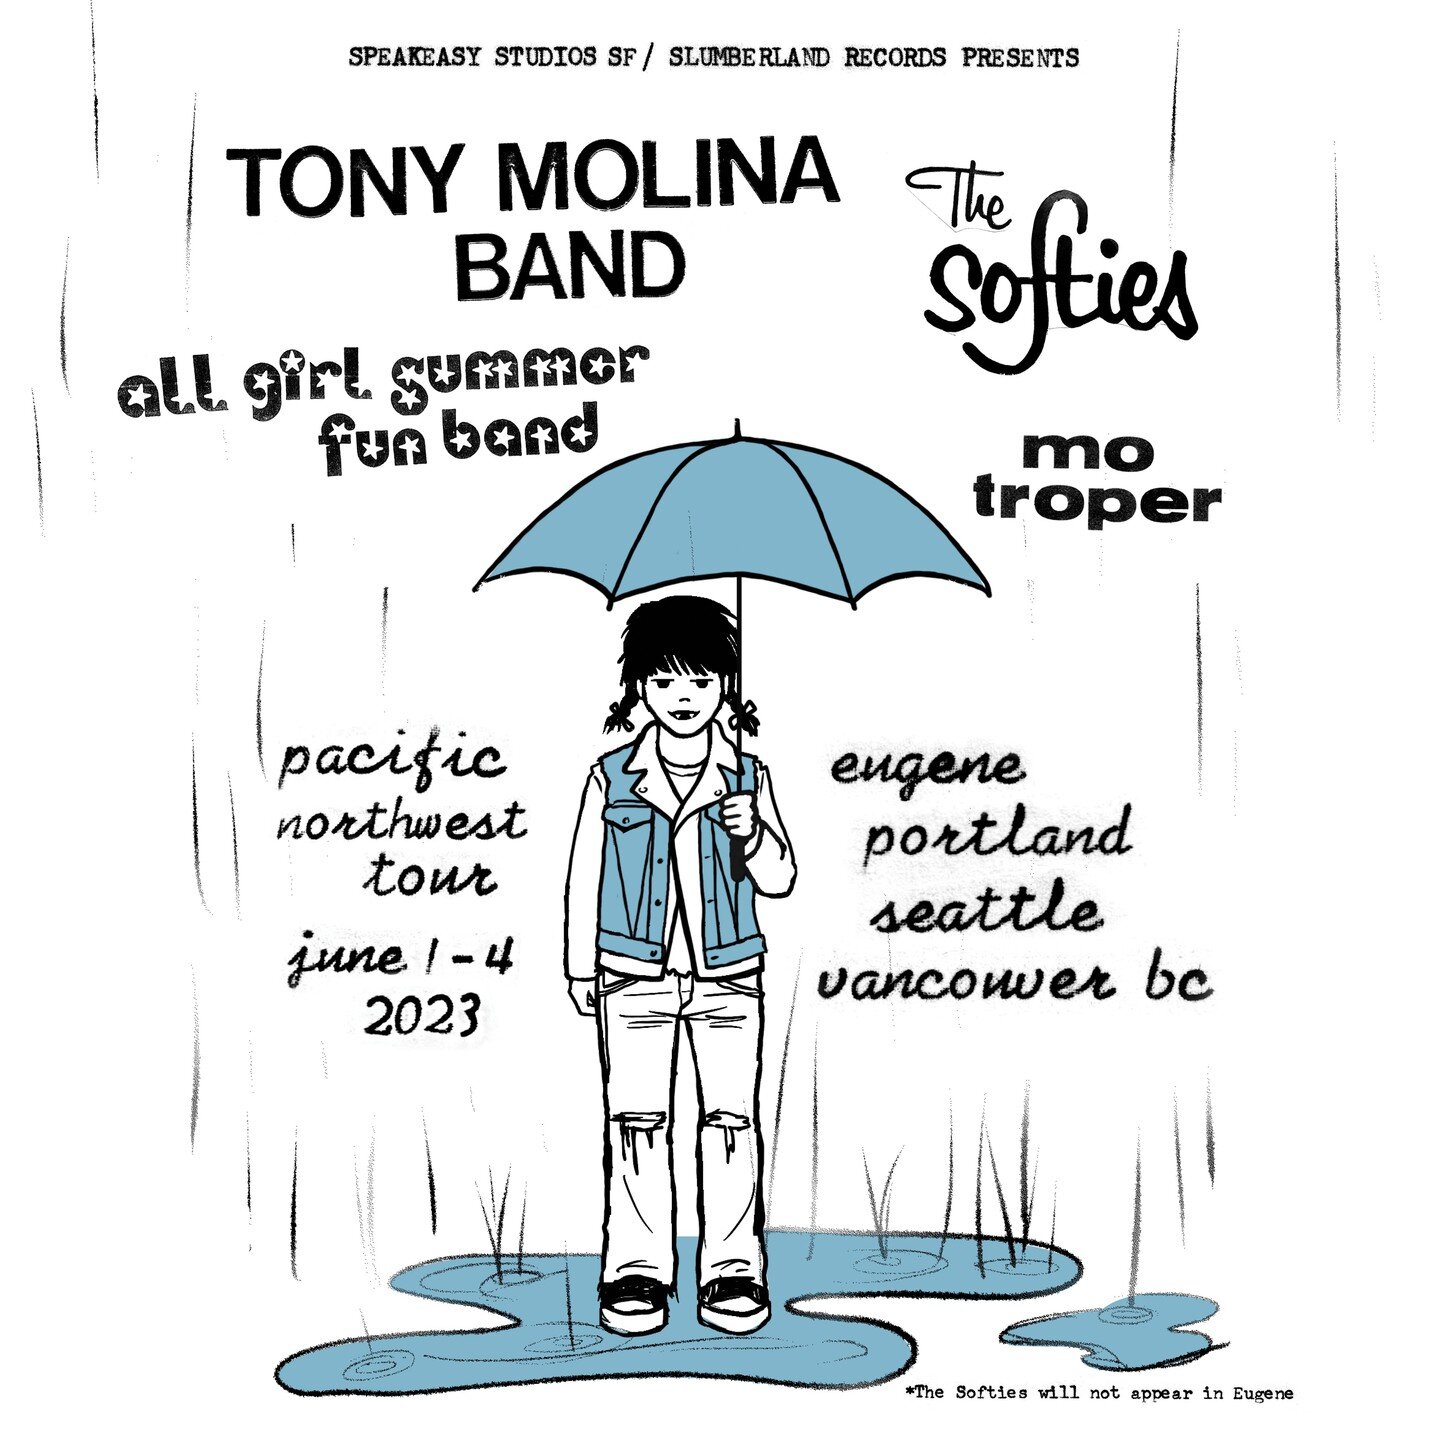 I am beyond stoked to announce that All Girl Summer Fun Band will be playing shows in the PNW this June with Tony Molina, The Softies and Mo Troper! June 1-4, 2023 (Eugene, Portland, Seattle, Vancouver, B.C.) More info &amp; links to buy tickets at w